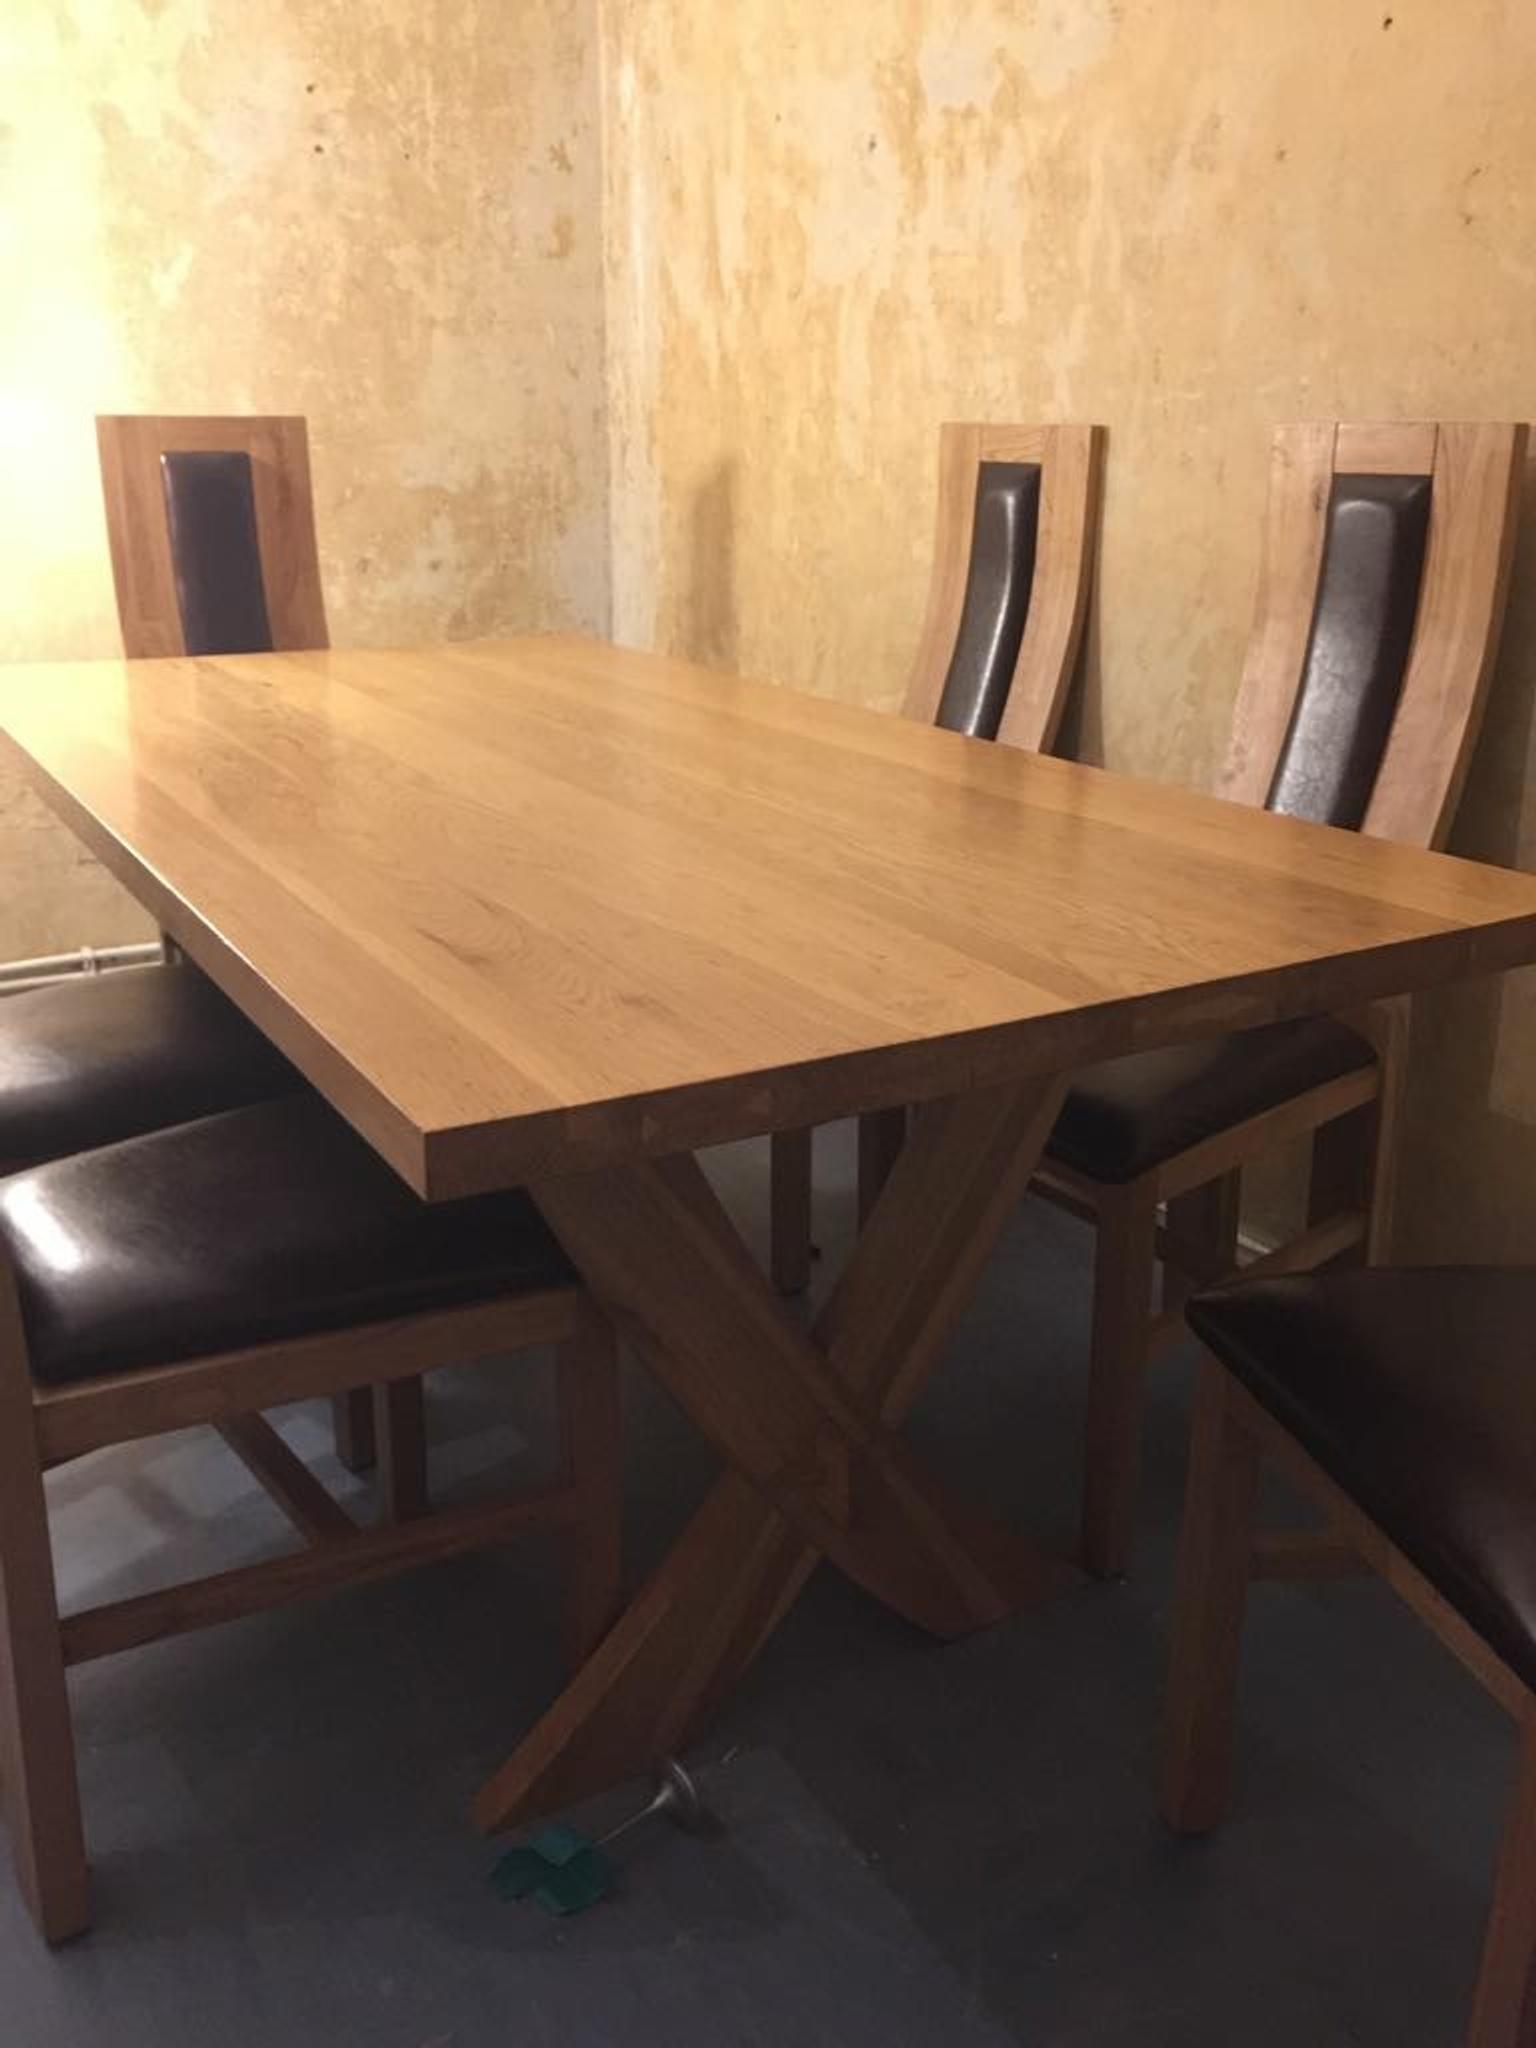 Solid Oak Dining Set With 6 Chiars In E8 London Fur 420 00